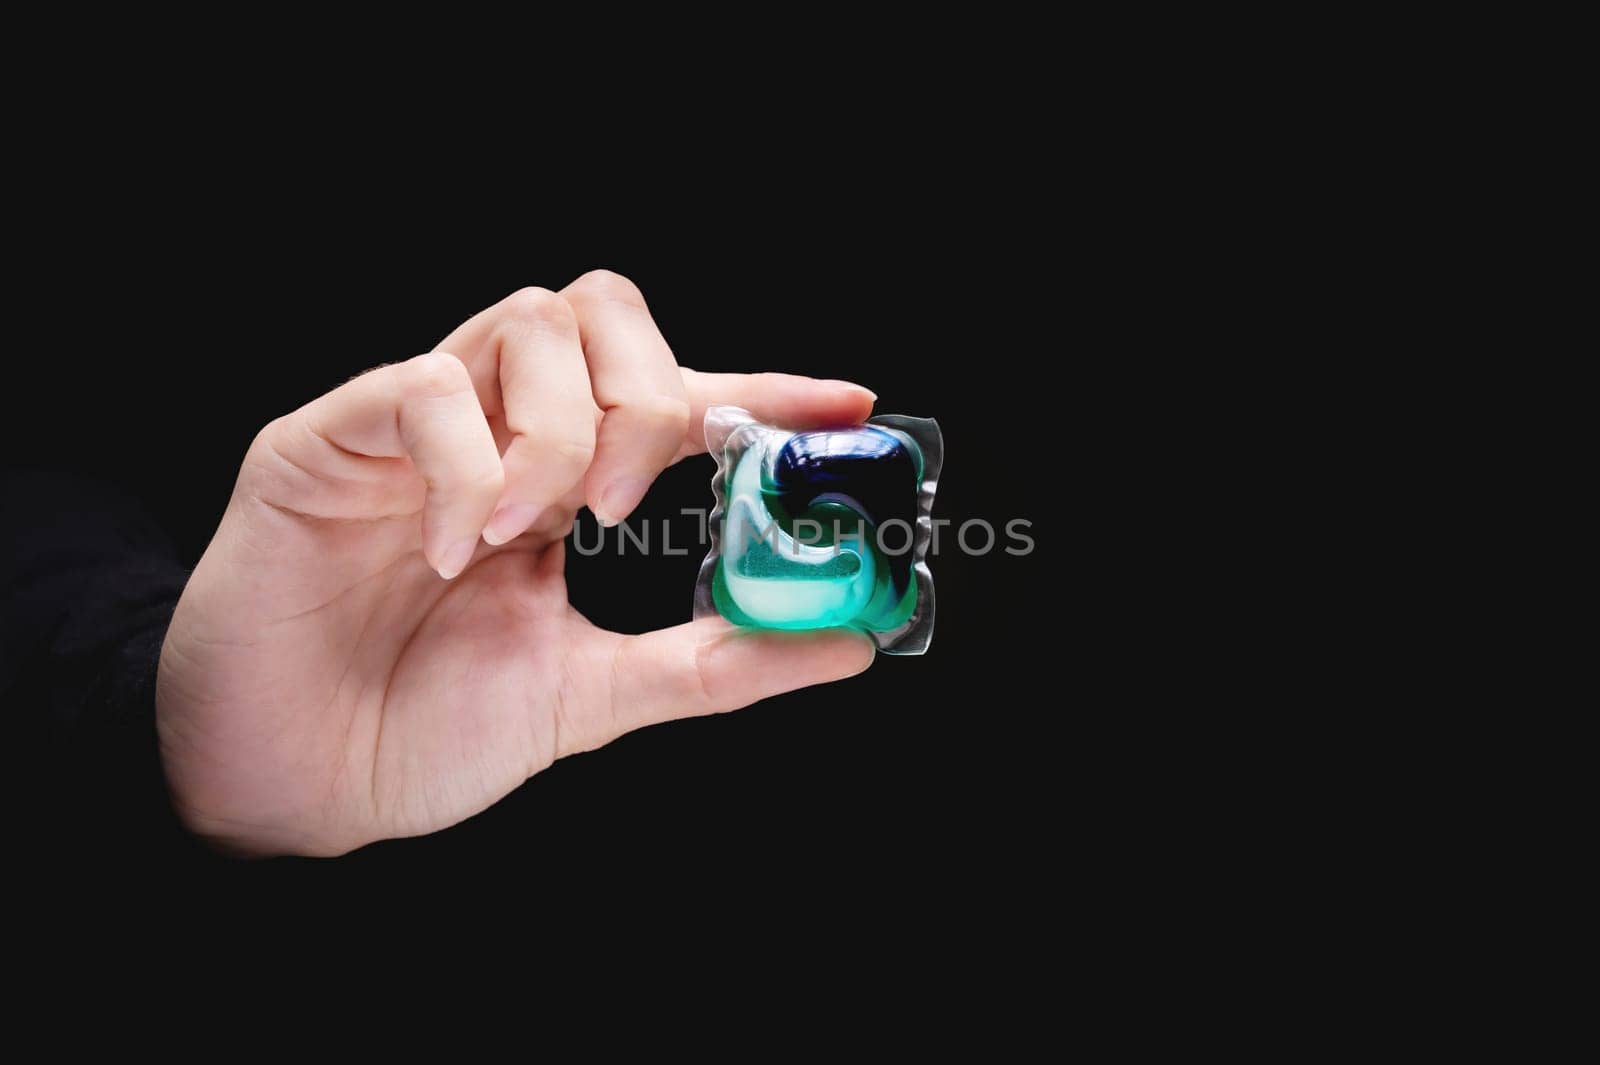 Cropped view of woman's hand holding laundry capsule on dark background, close-up.